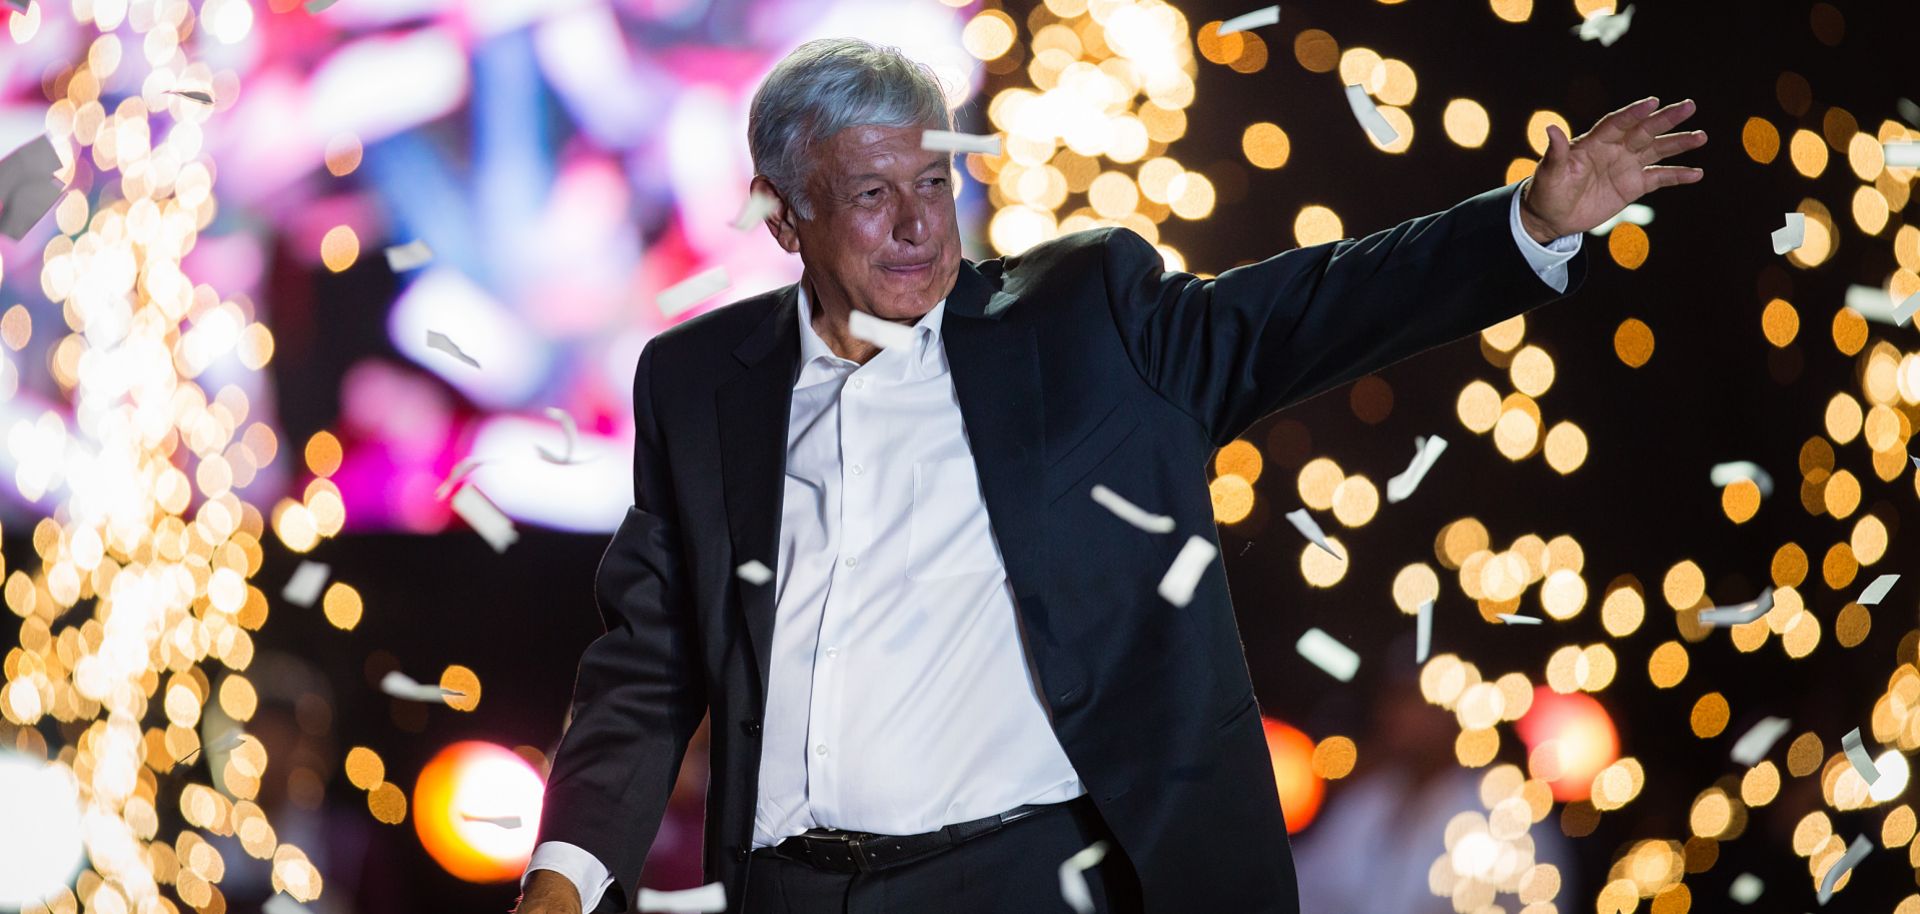 Andres Manuel Lopez Obrador is Mexico's president-elect. He's pictured here during a June 27, 2018, campaign event in Mexico City.